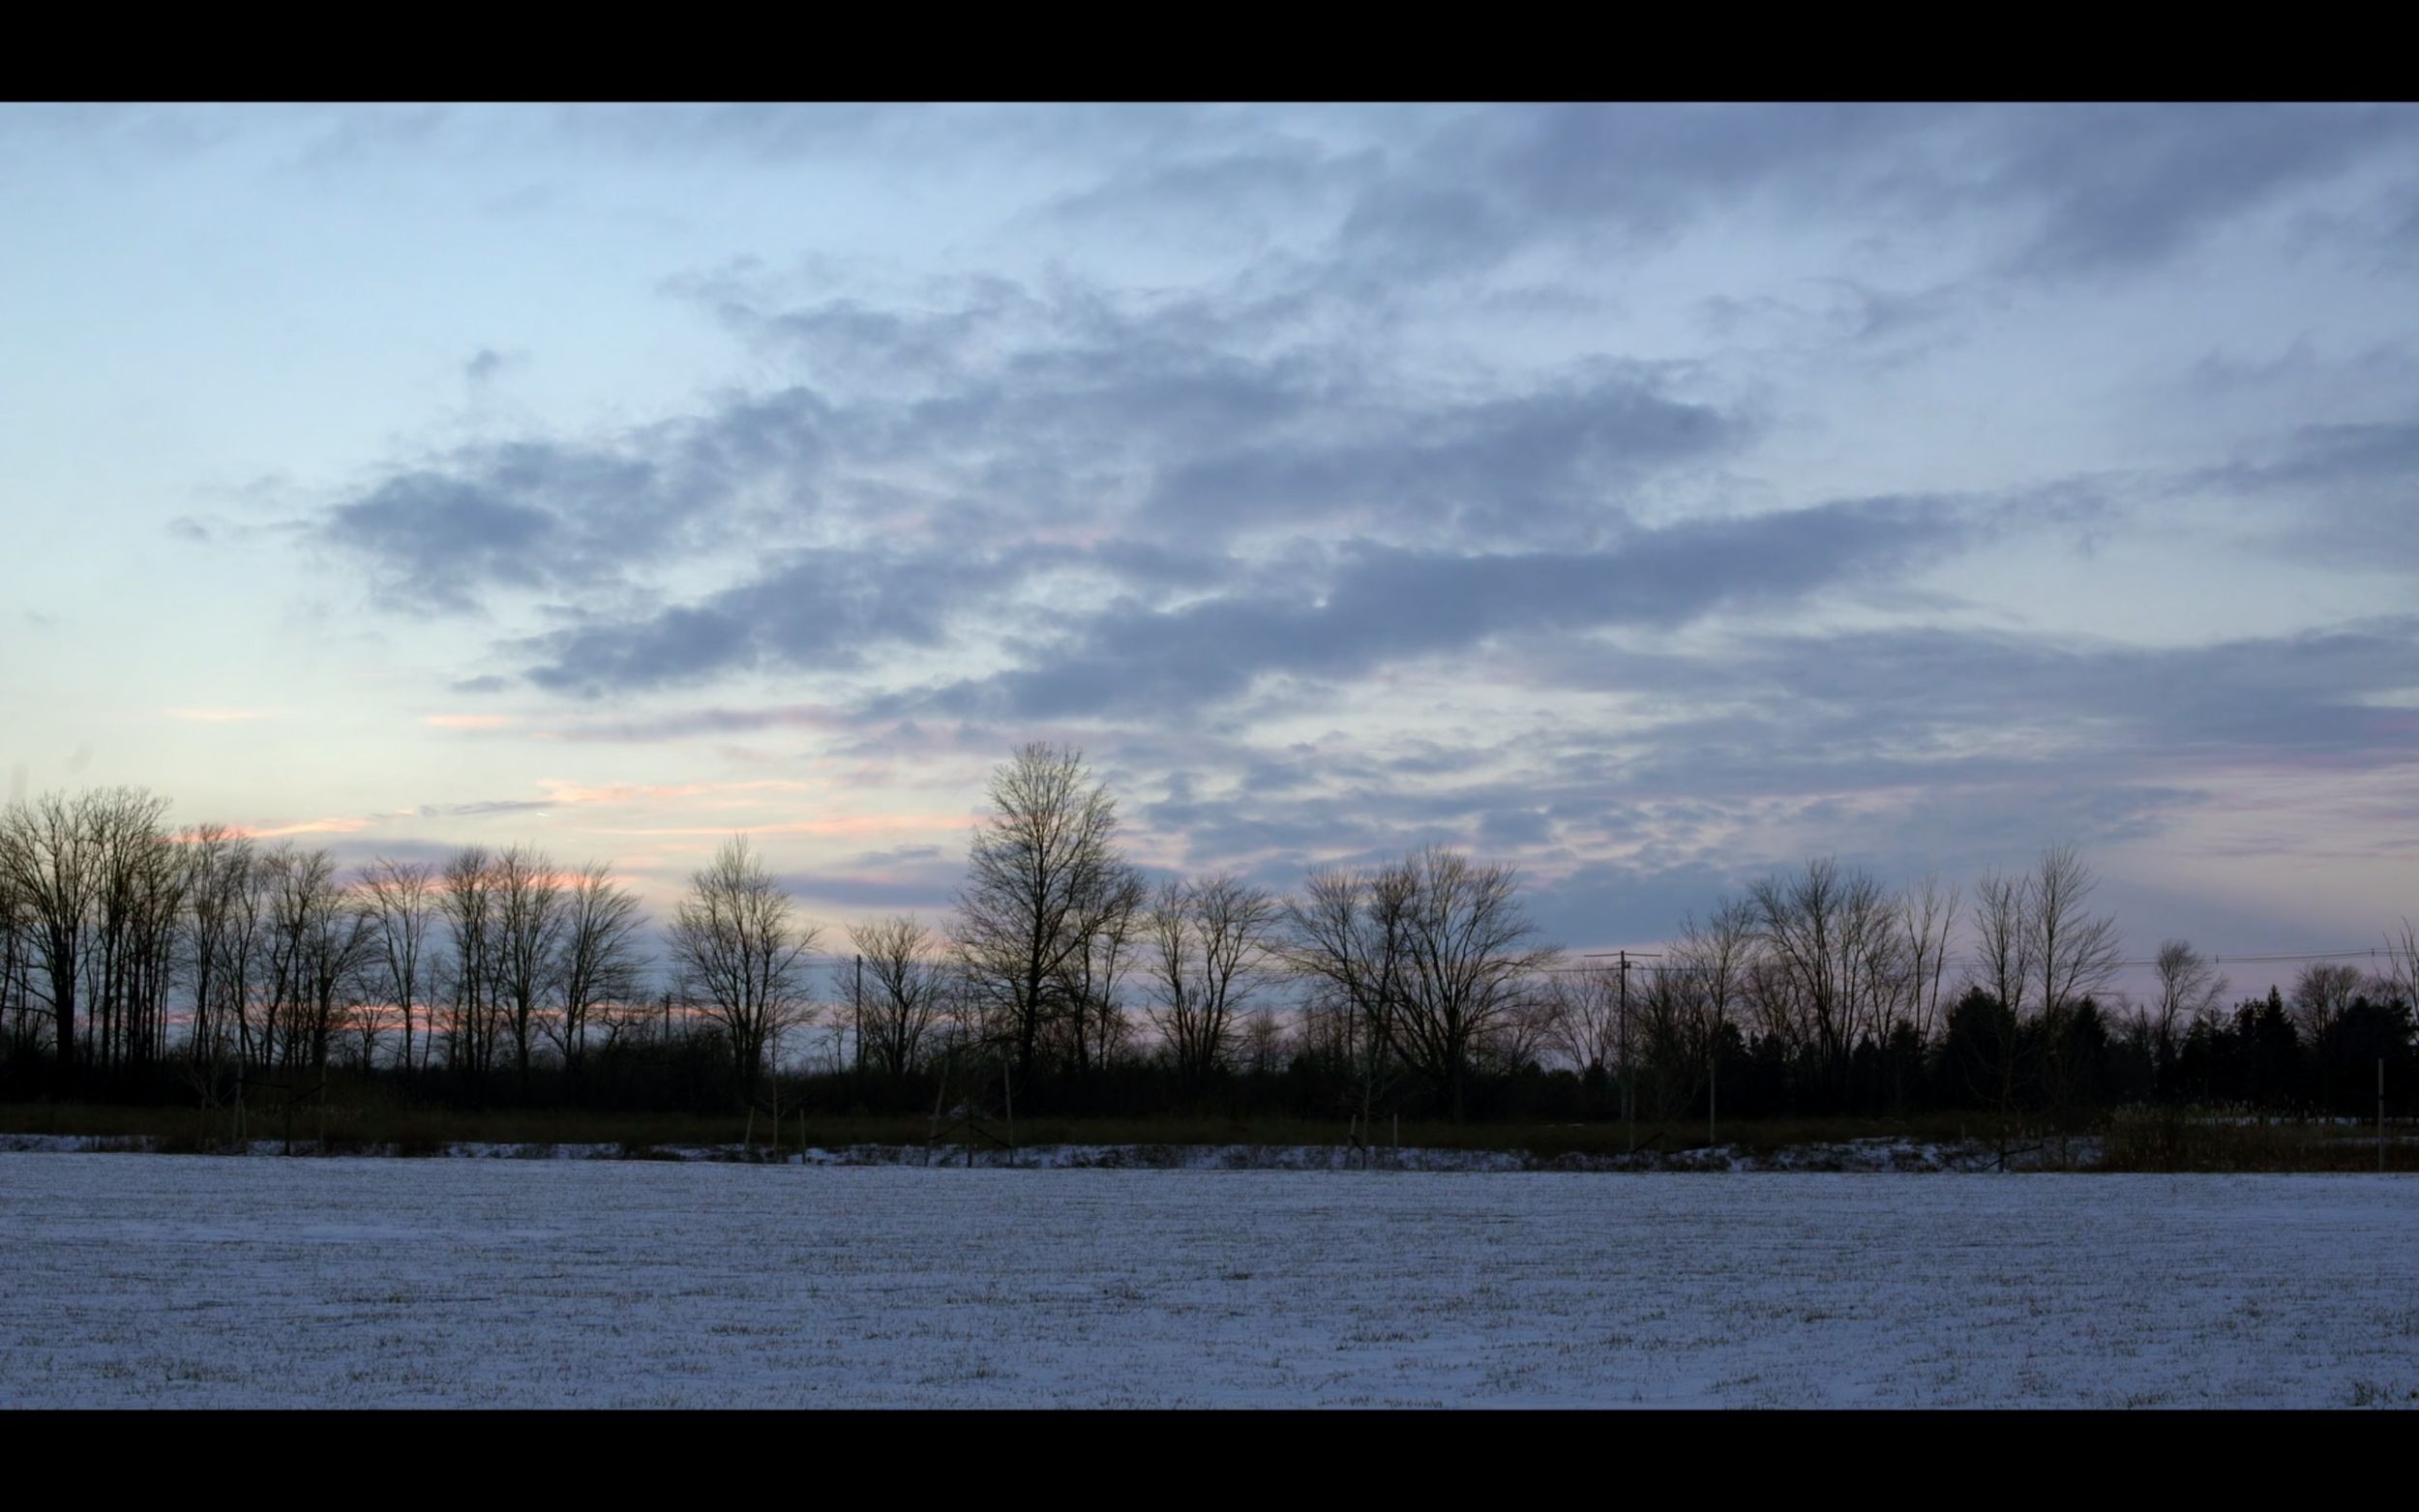 A snow-covered landscape at twilight, tall bare trees stand in the distance